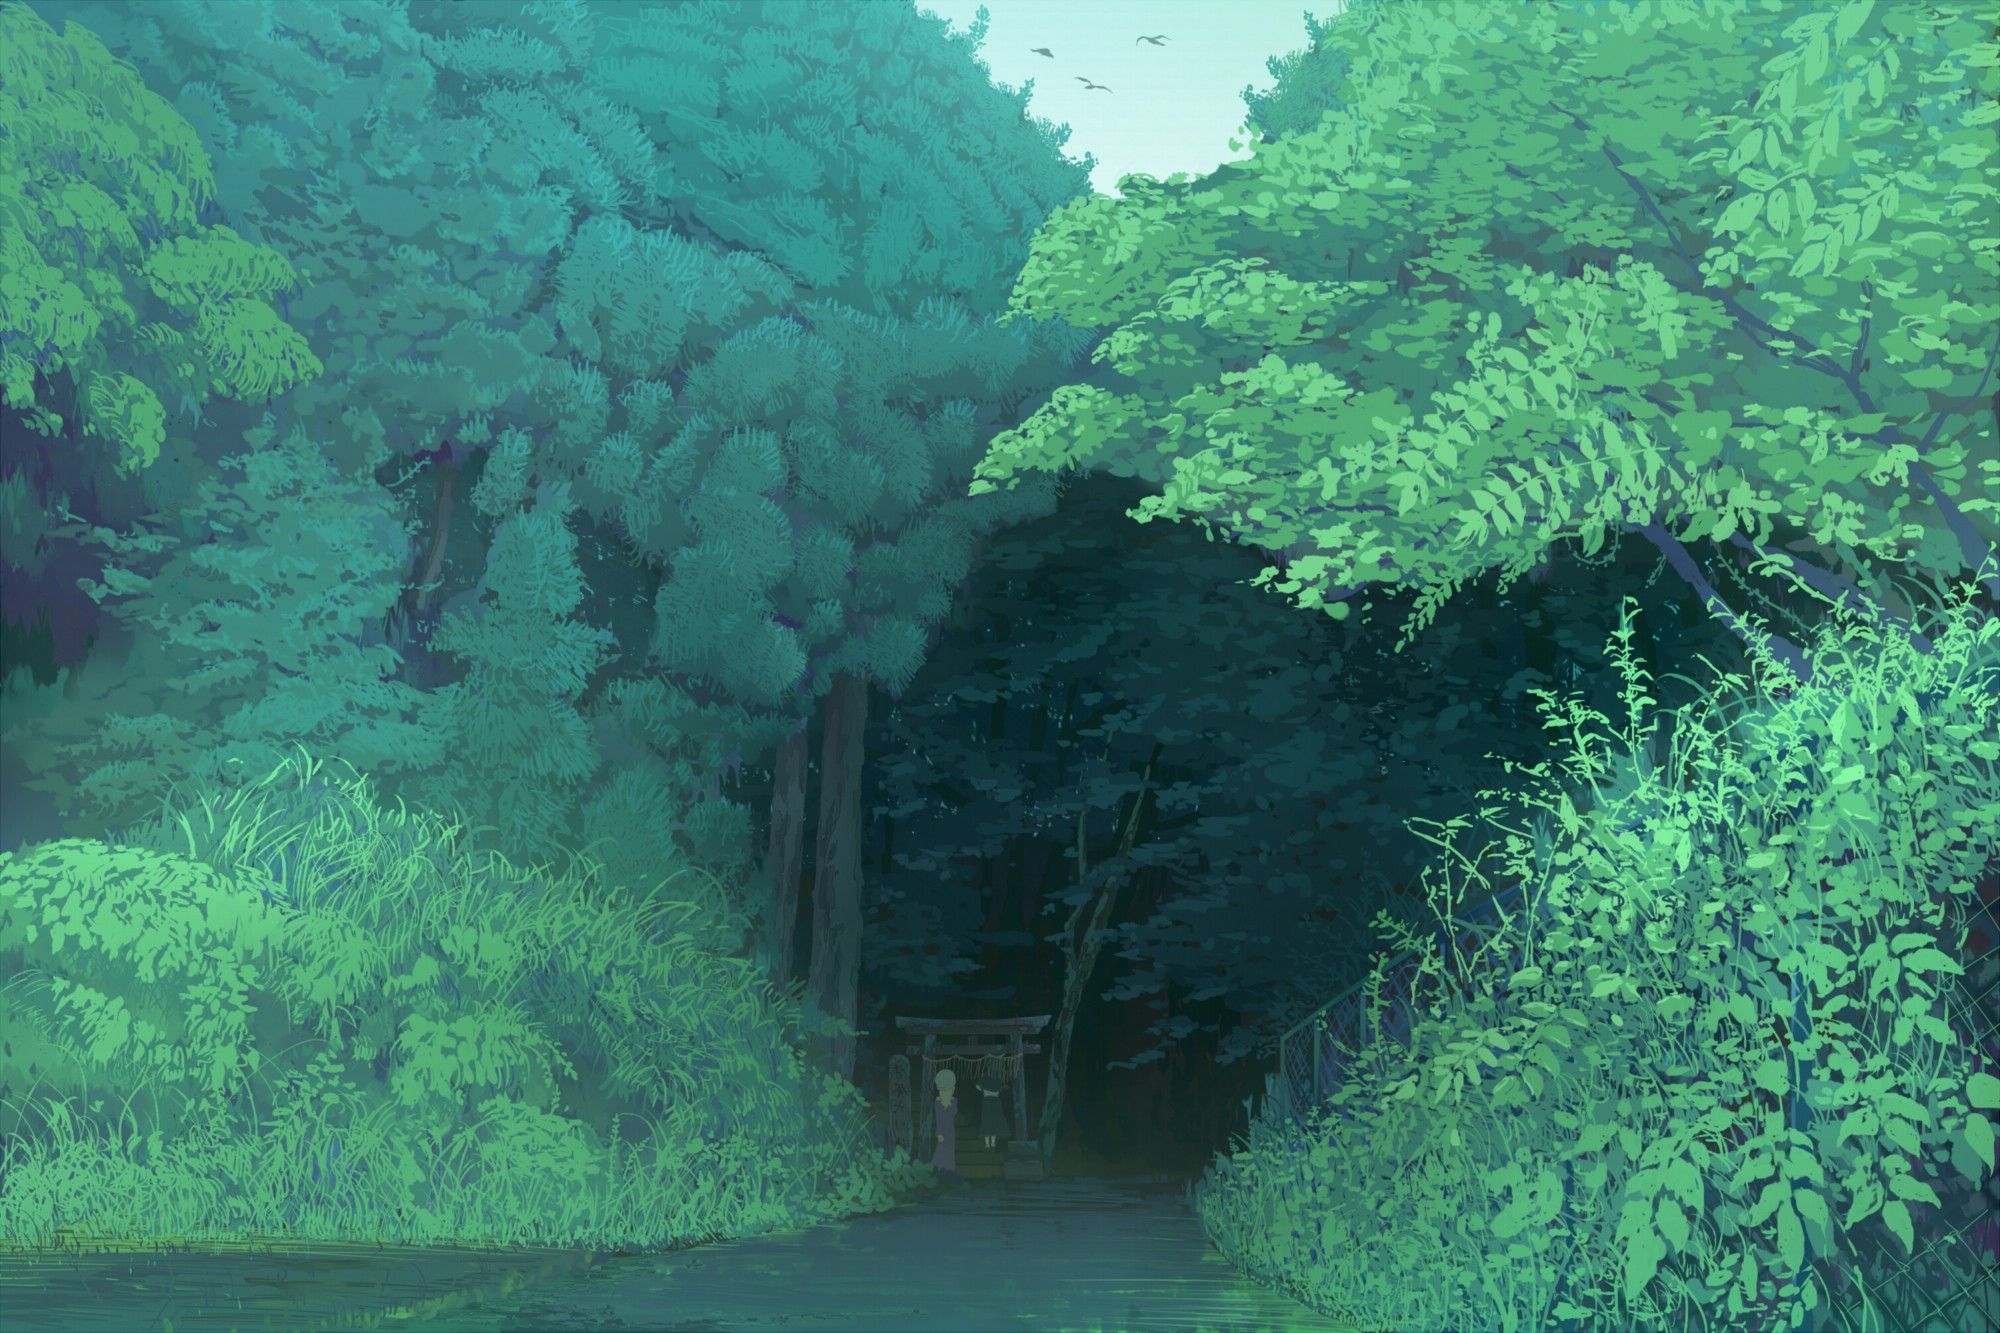 A painting of a small torii gate in a forest. - Nature, landscape